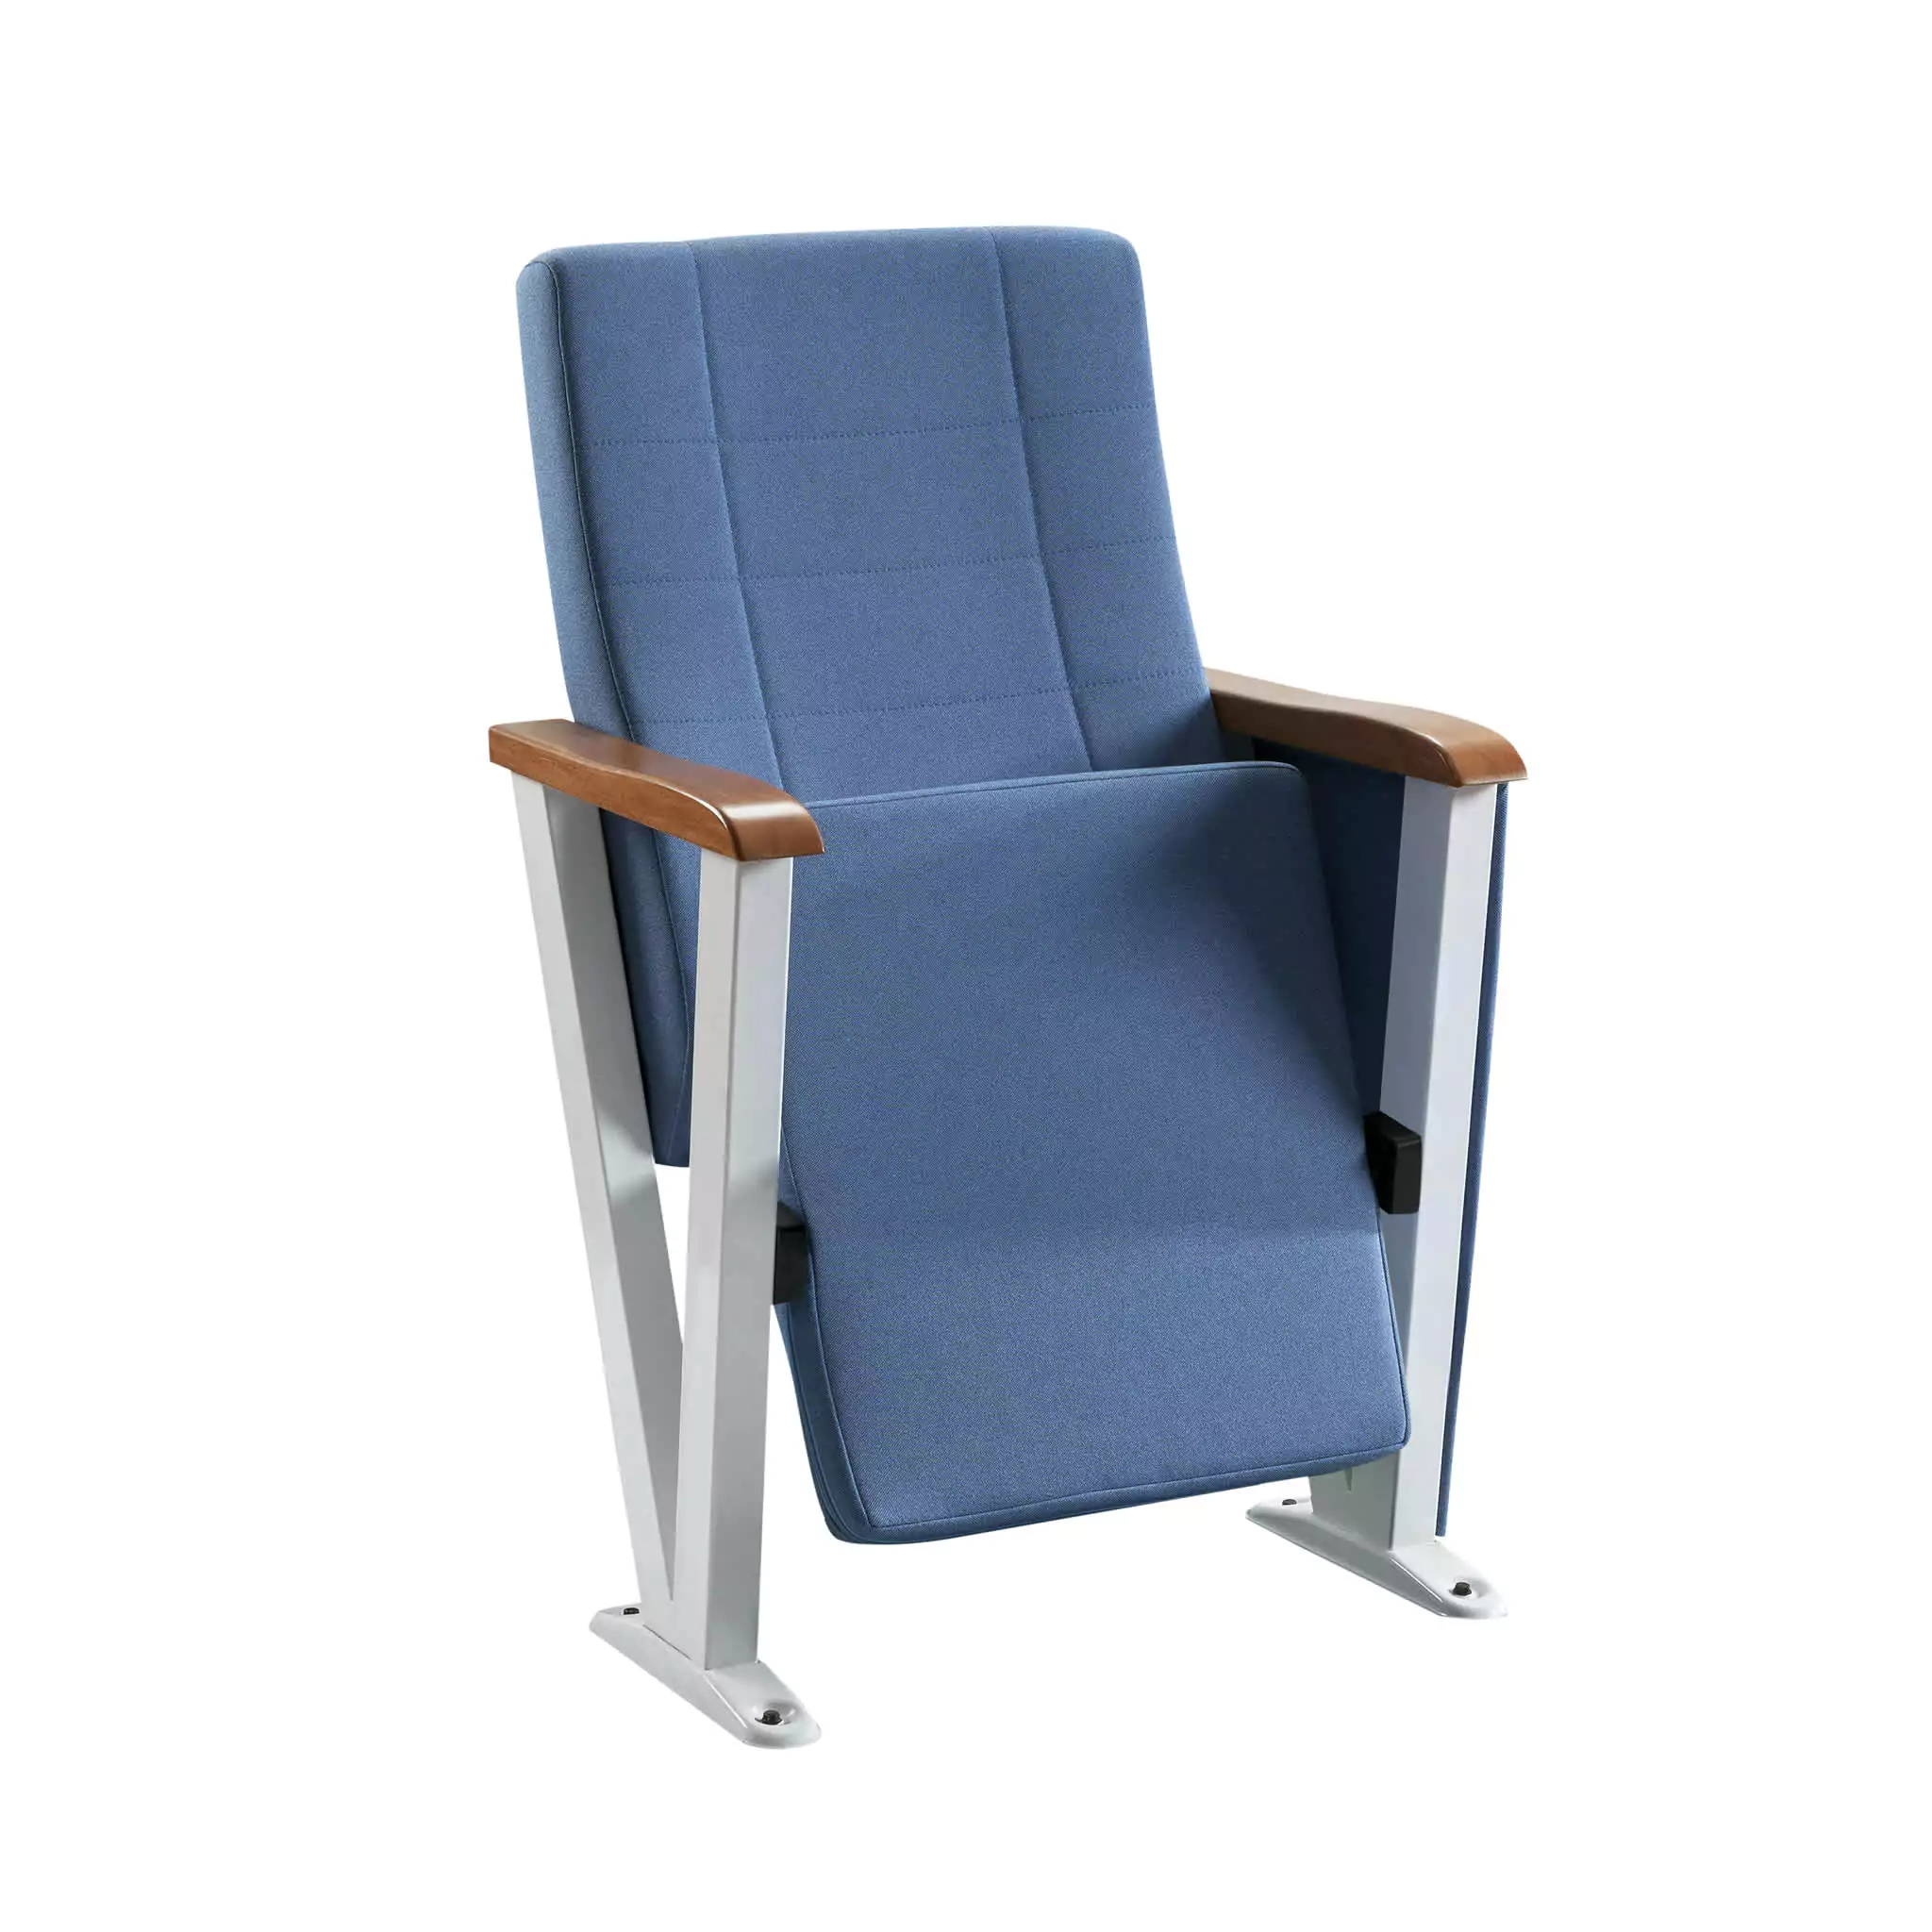 Simko Seating Product Conference Seat Safir V